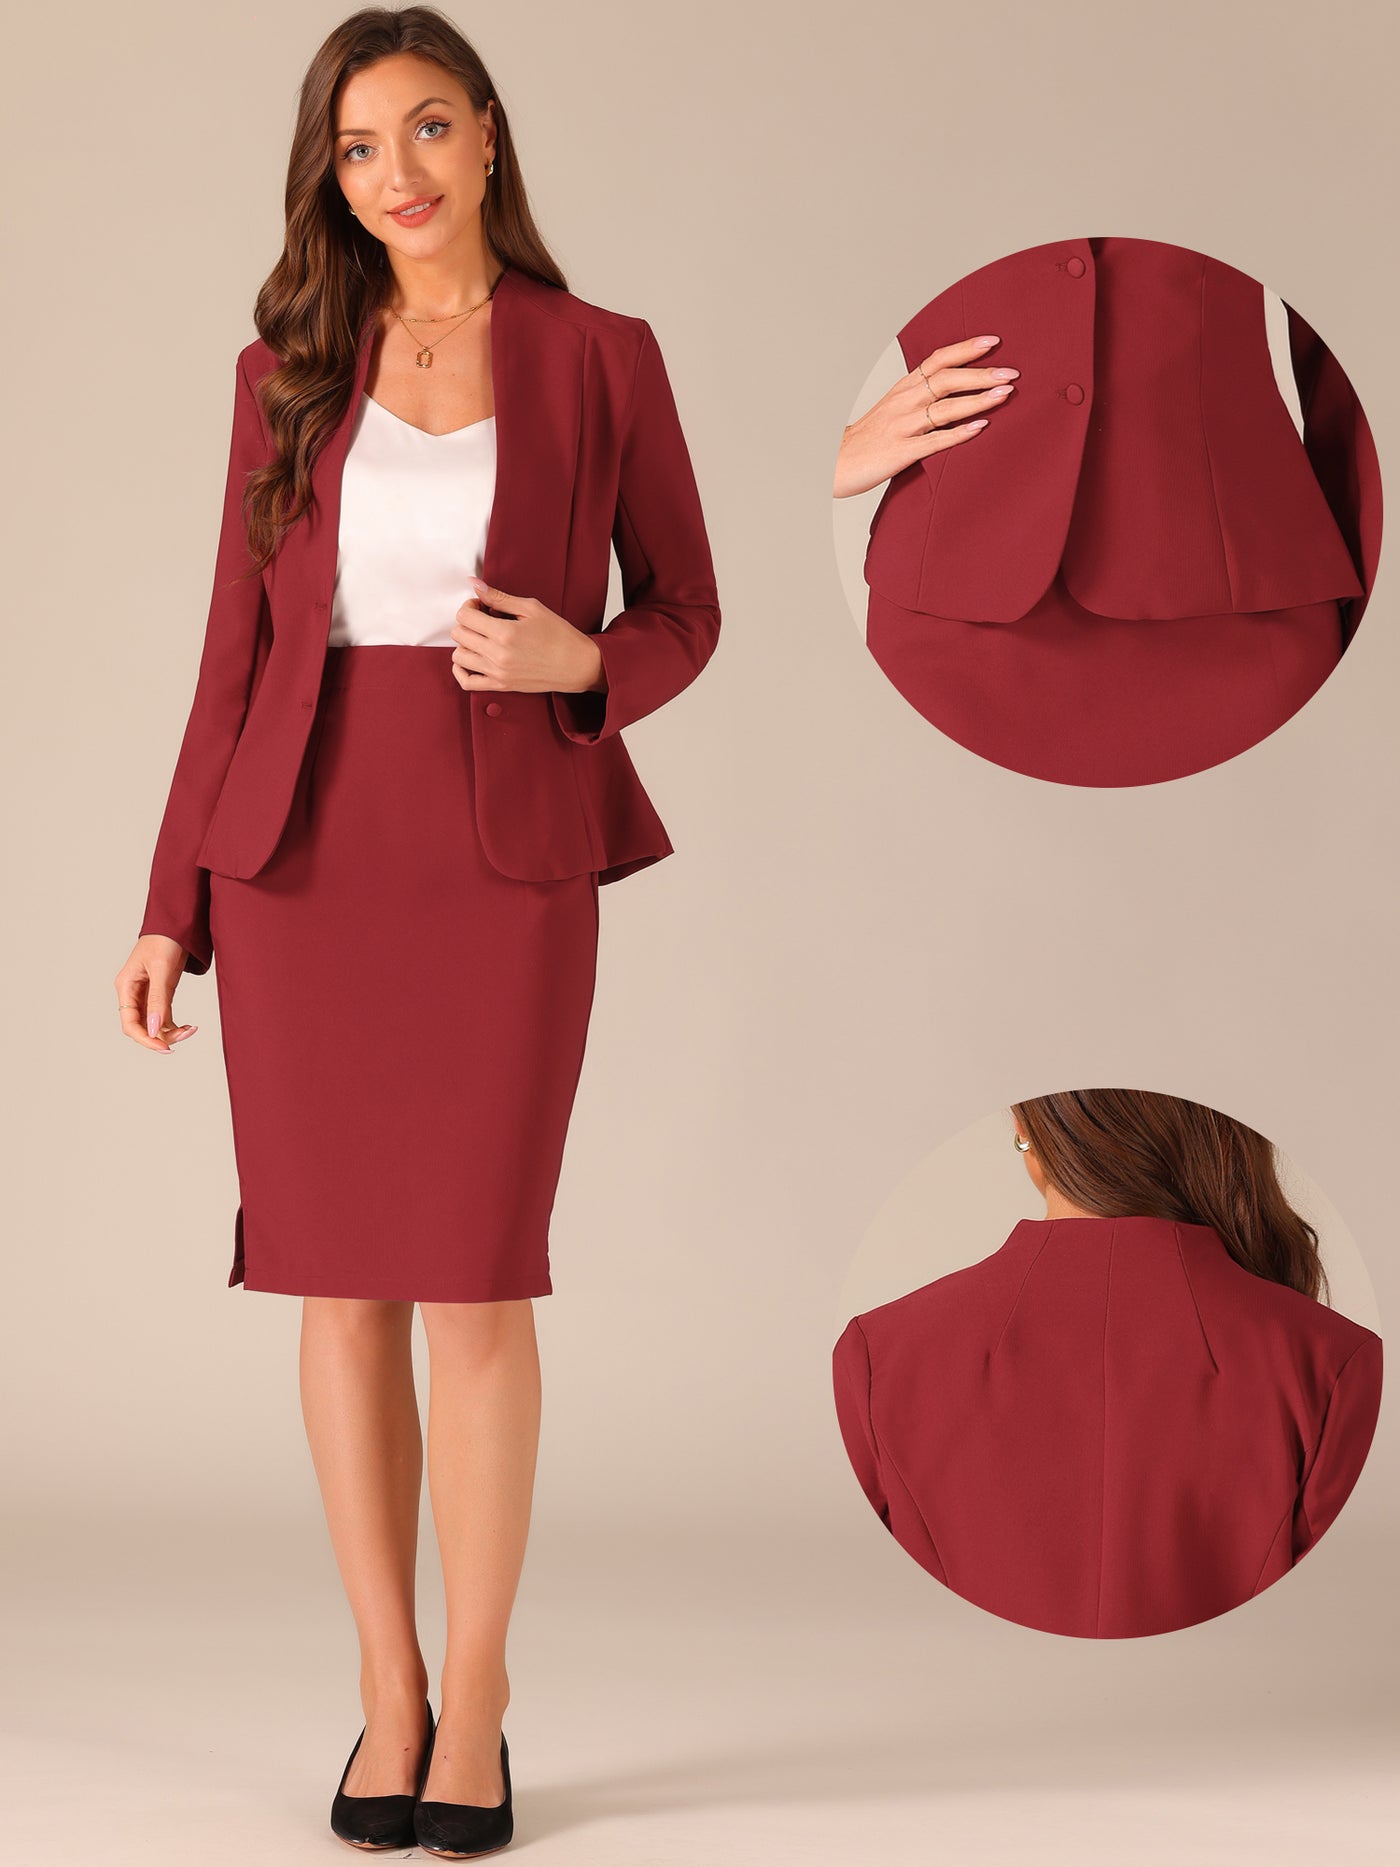 Allegra K 2pc Business Collarless Blazer and Formal Pencil Skirt Suit Sets